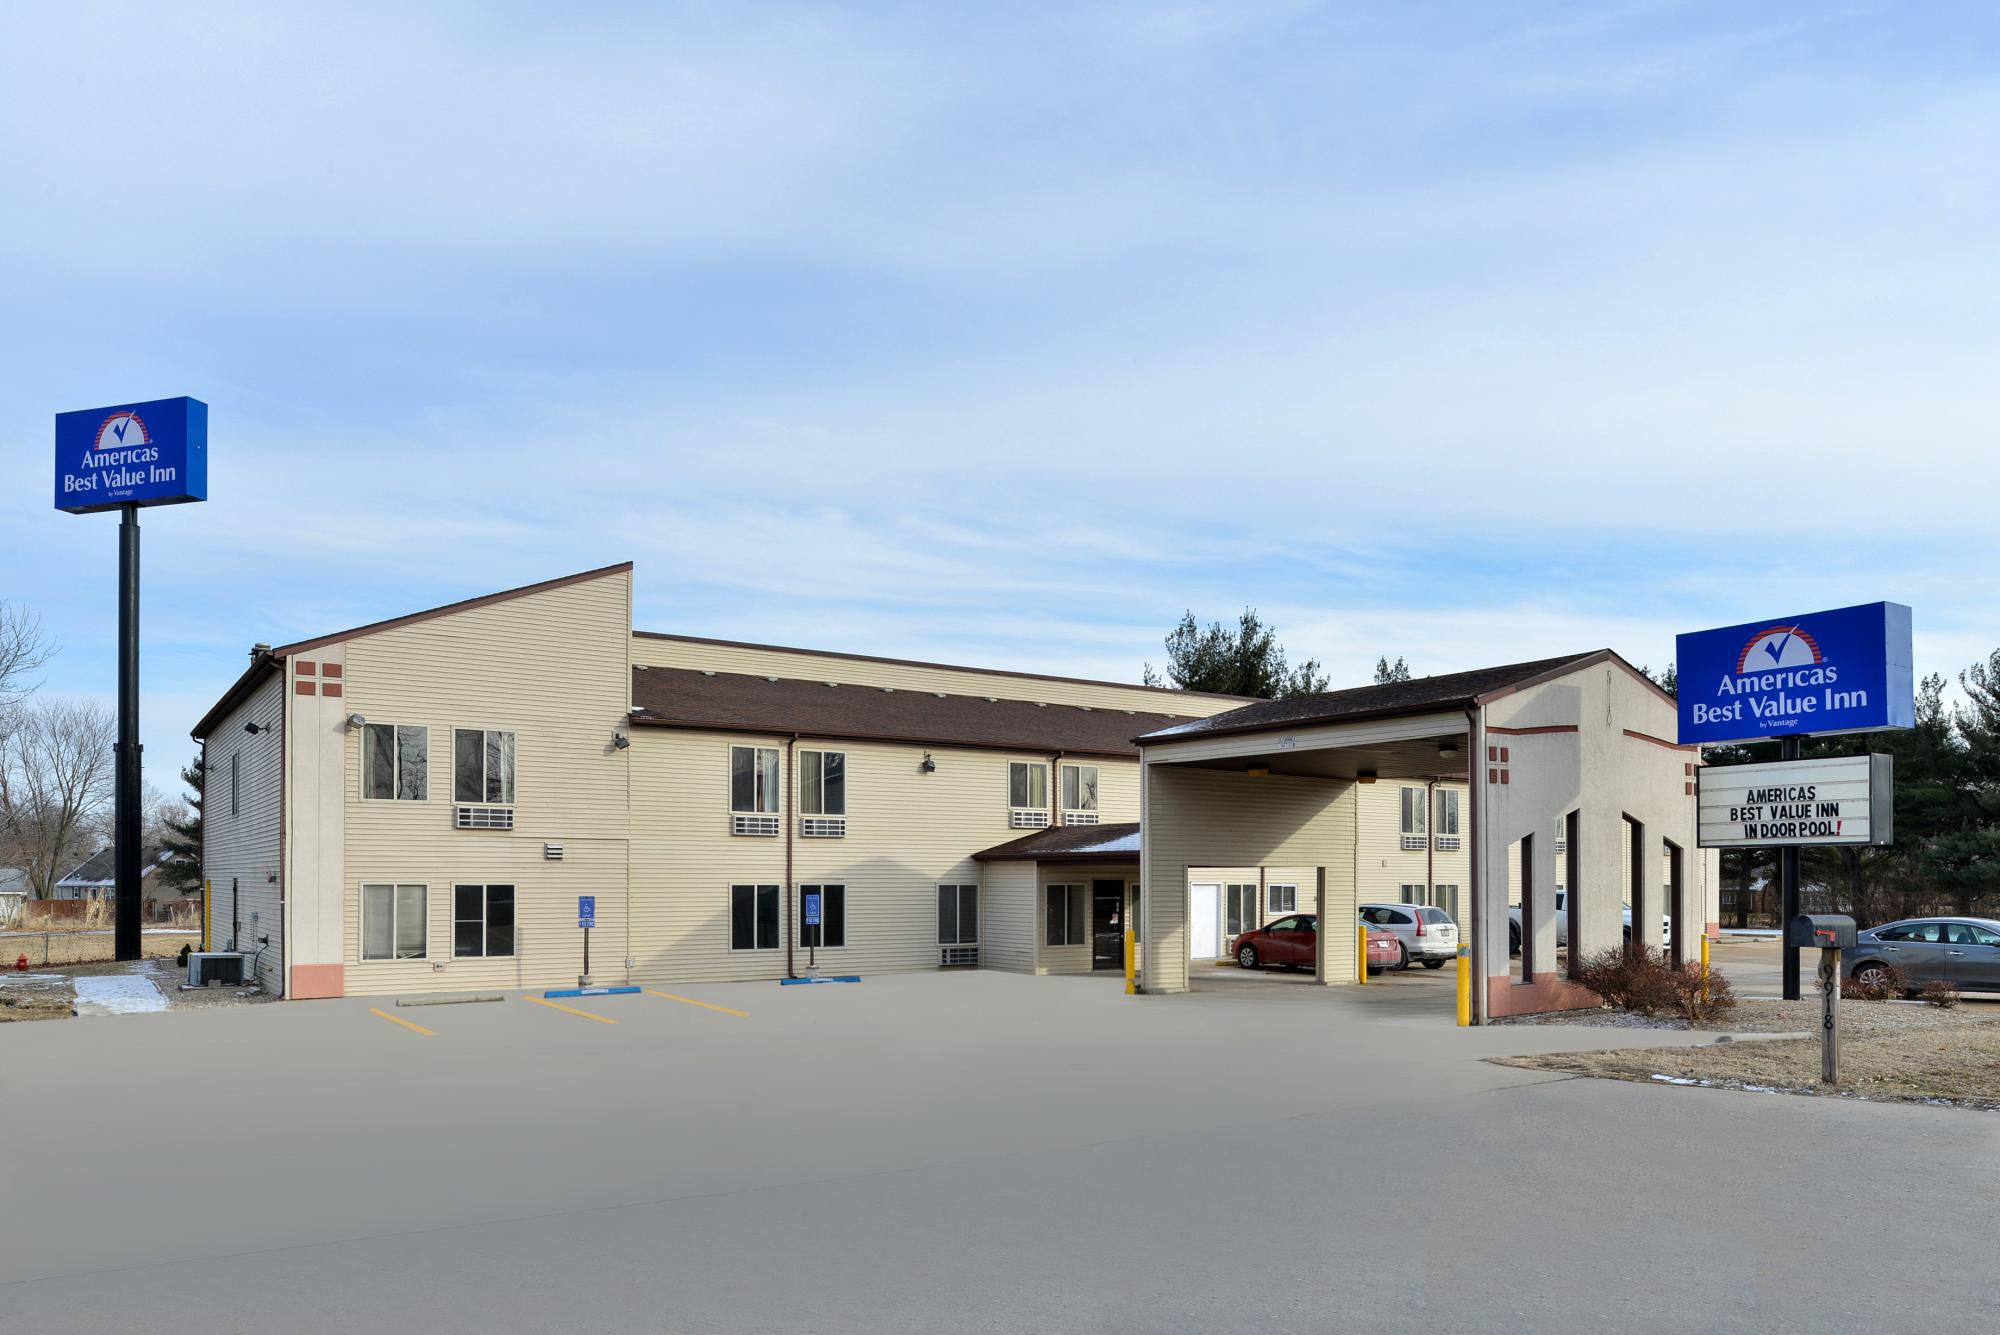 Hotel exterior and parking lot